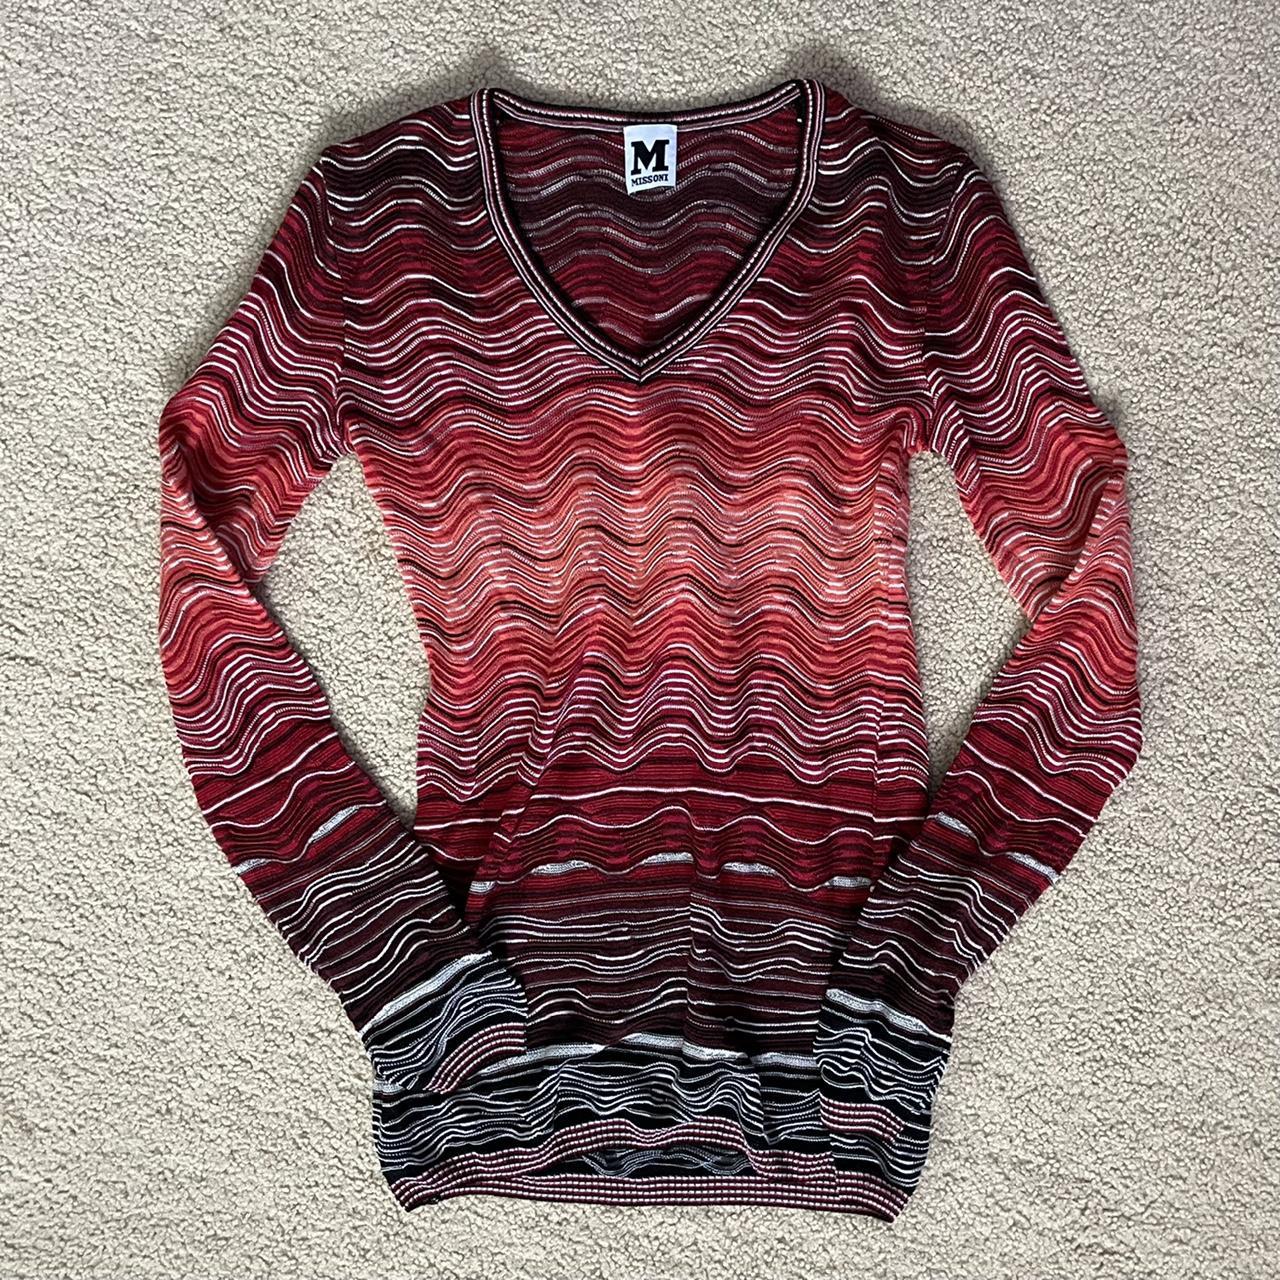 Missoni Women's Burgundy and Brown Top